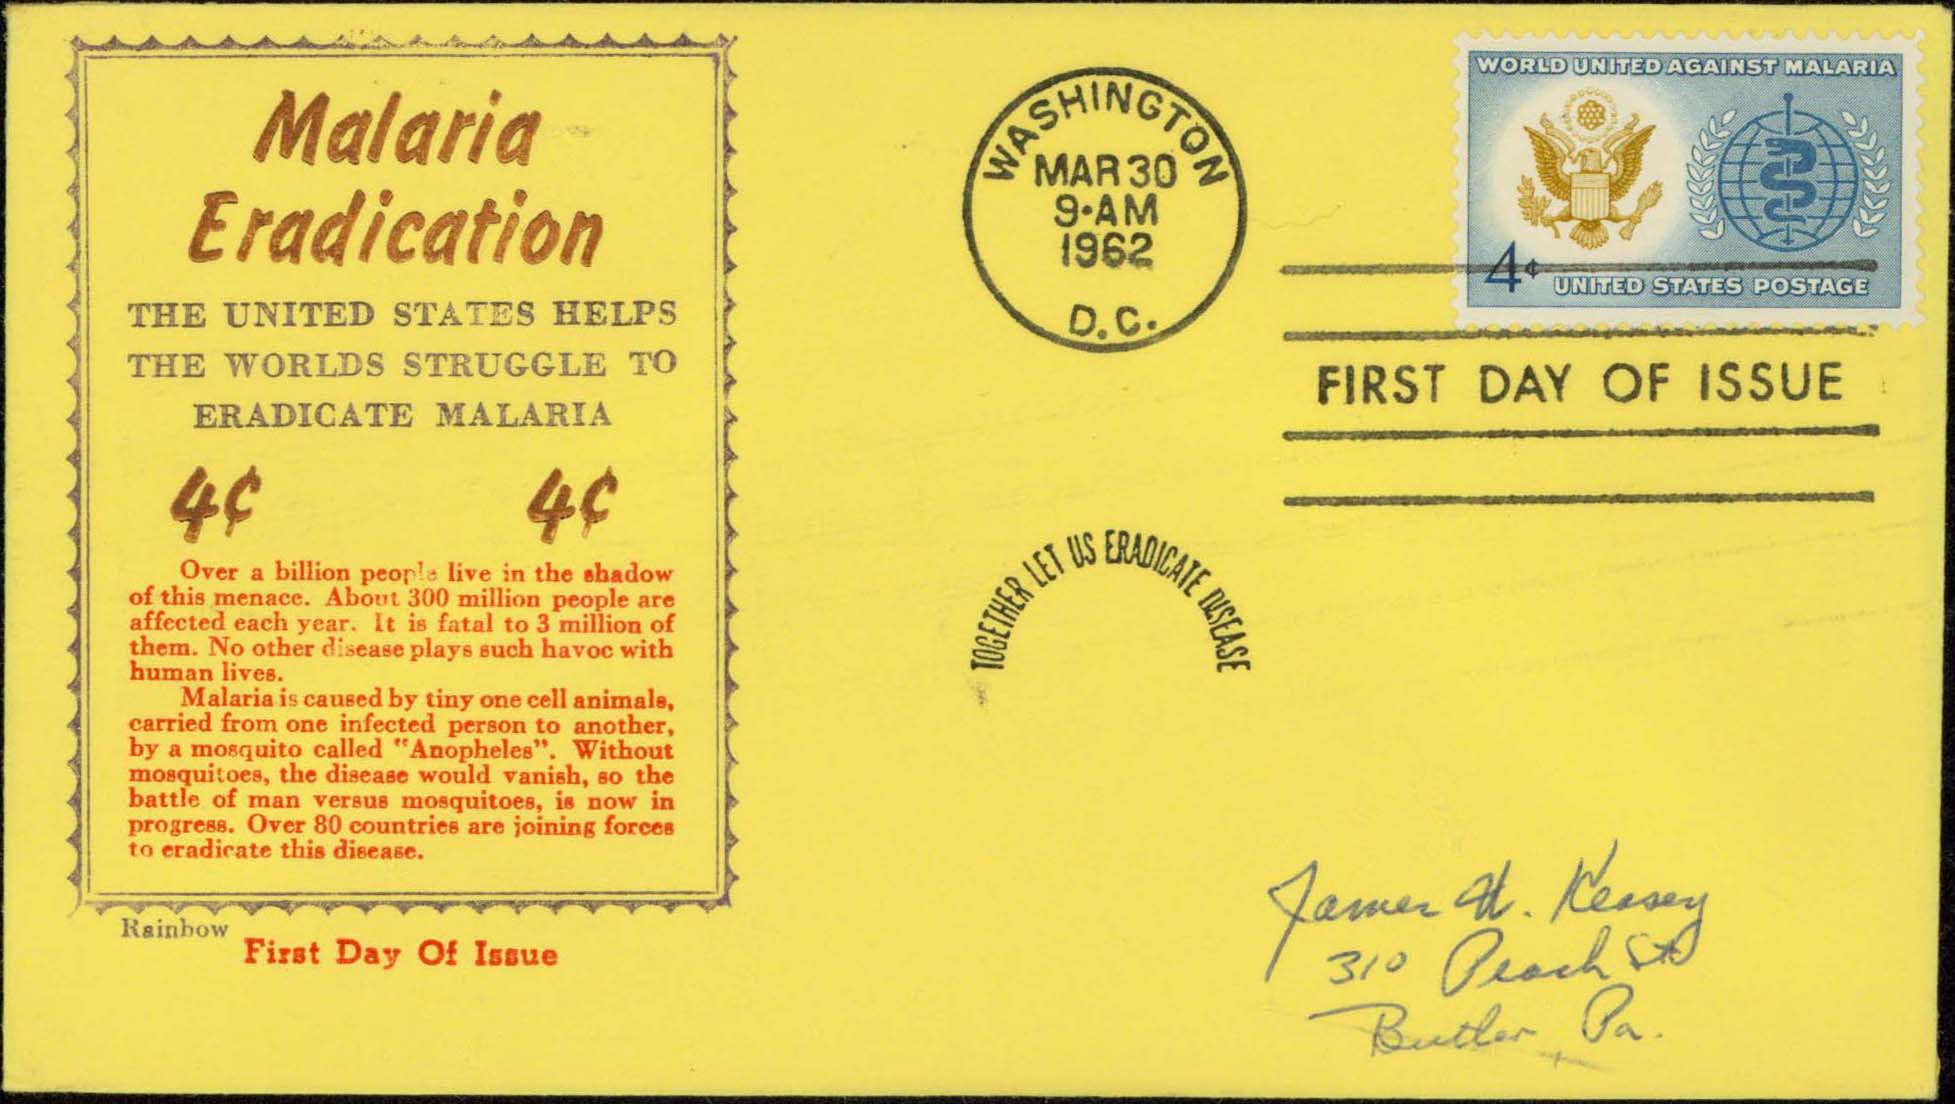 Scott 1194 (FDC w/ Rainbow Cachet) (Border) = Gray, (4¢) = Brown, (Text) = Red, (Paper) = Yellow